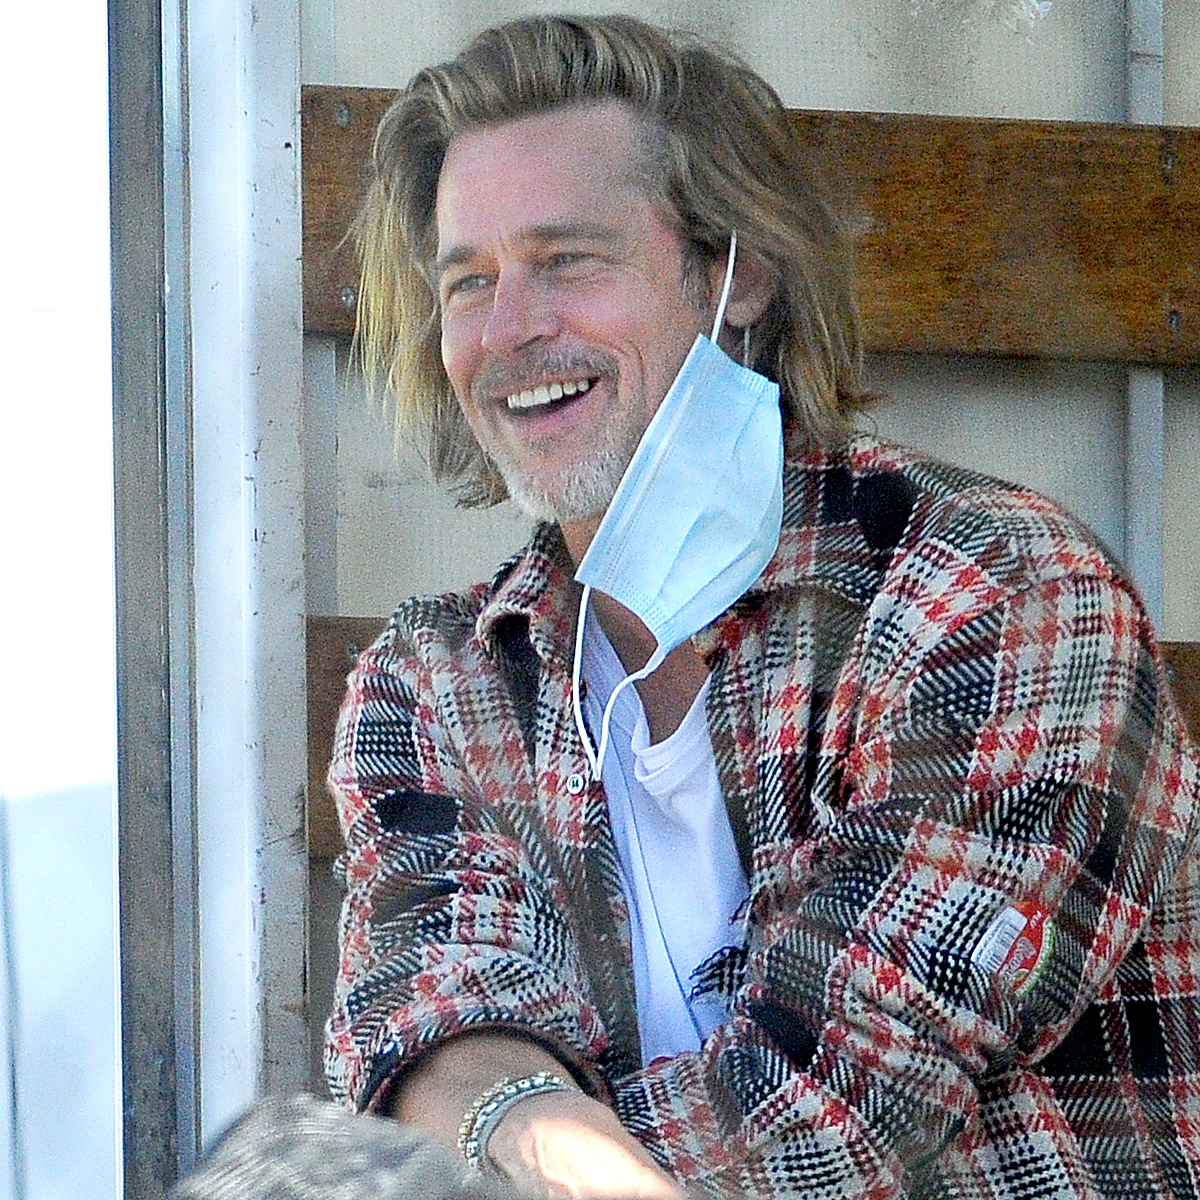 Brad Pitt channels his youthful 'Legends of the Fall' look during